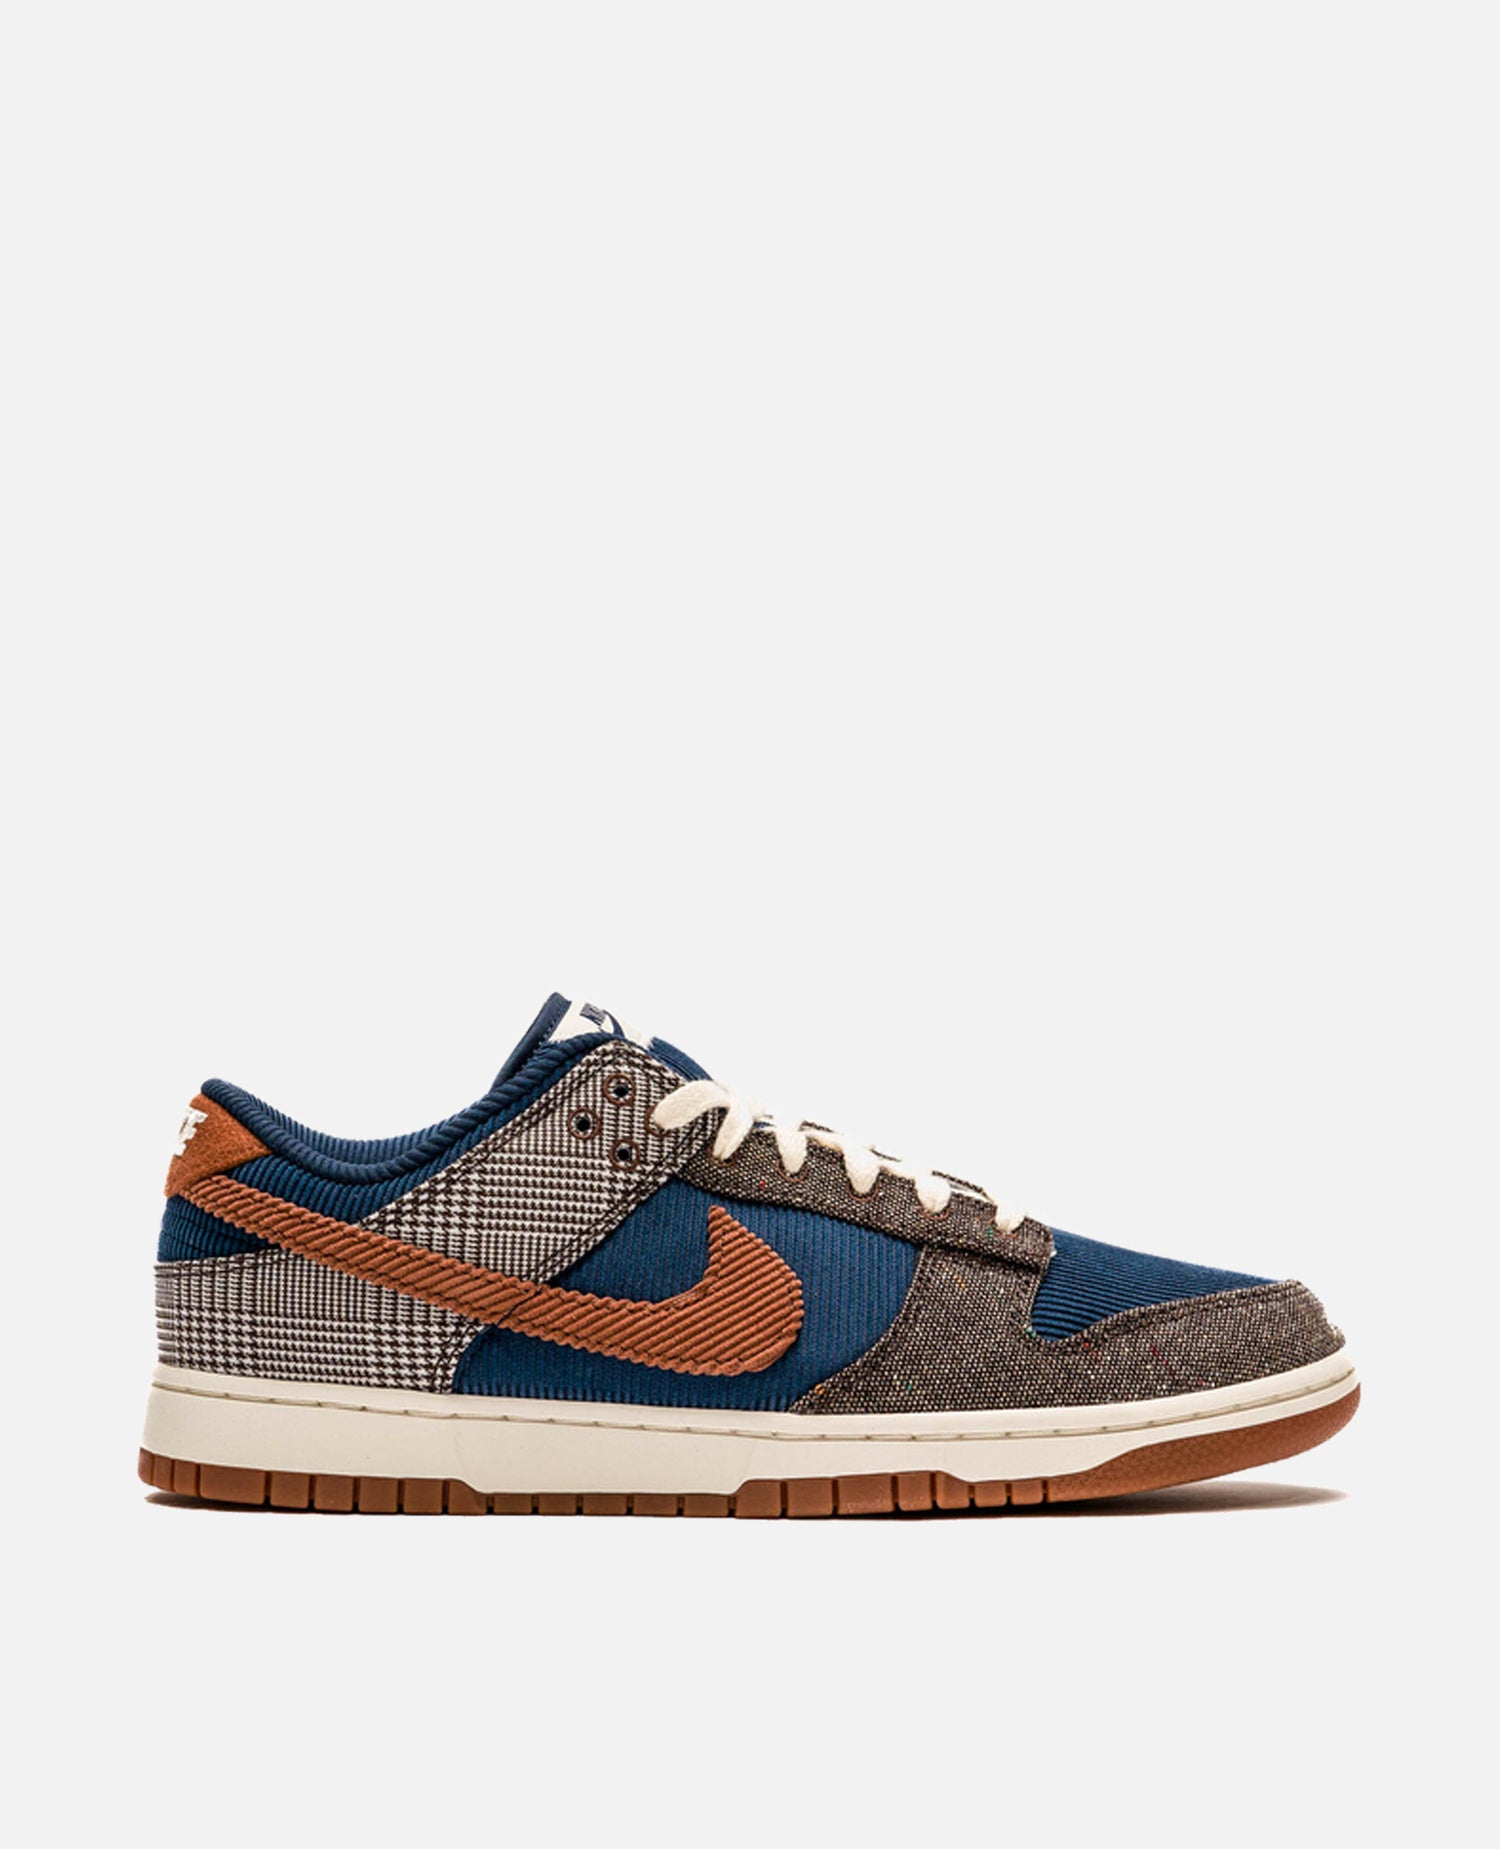 Nike Dunk Low Prm (Midnight Navy/Ale Brown-Pale Ivory)